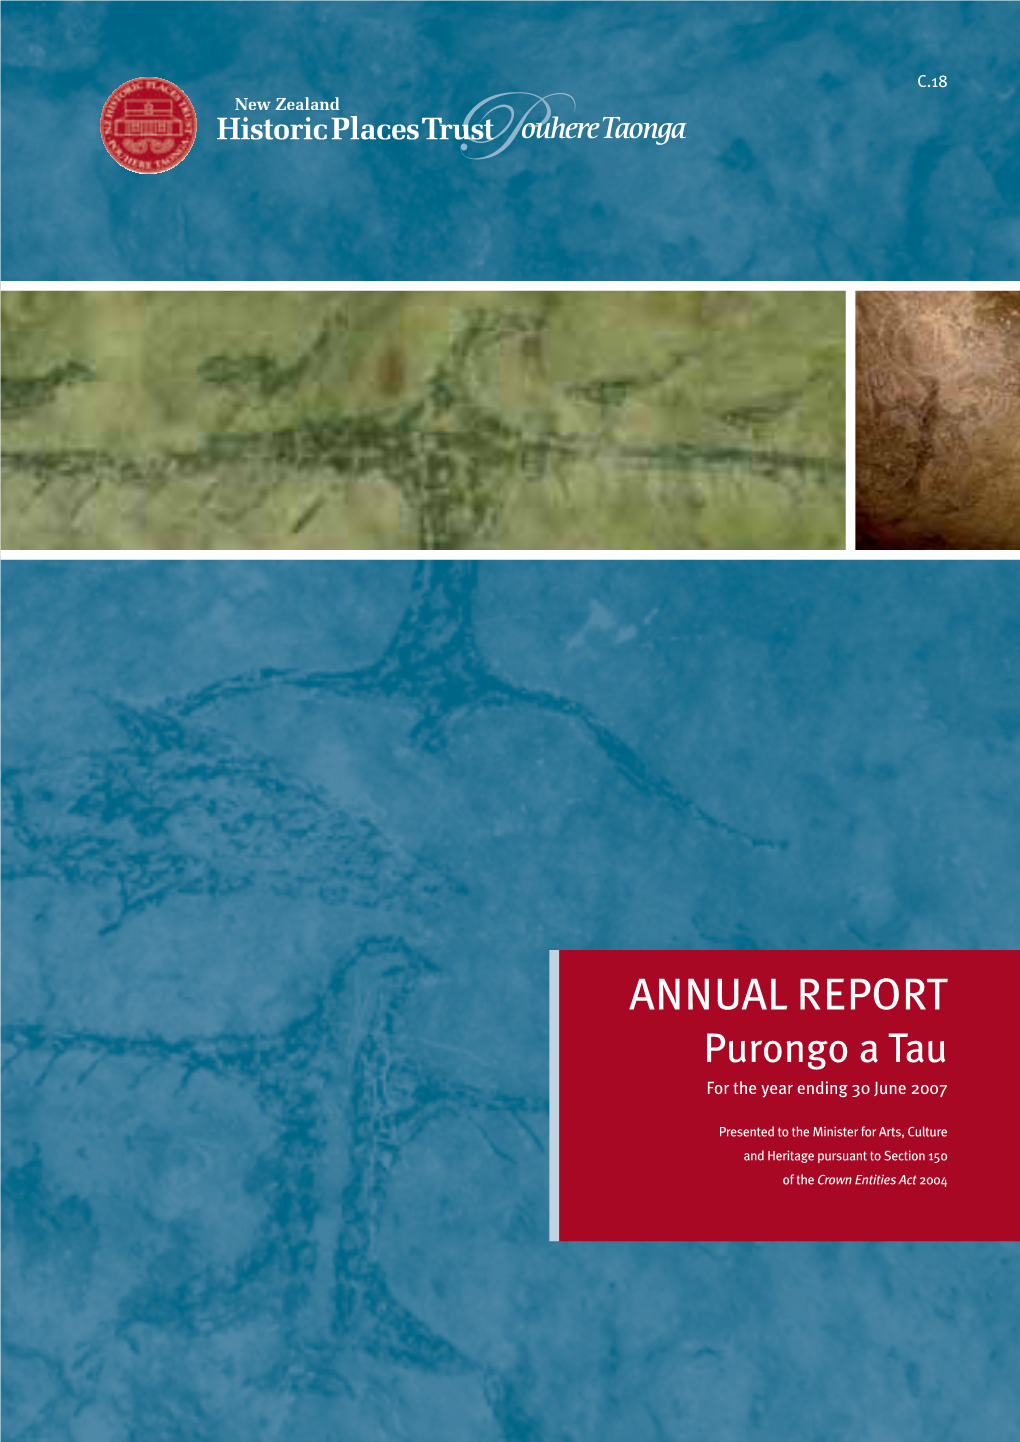 ANNUAL REPORT Purongo a Tau for the Year Ending 30 June 2007